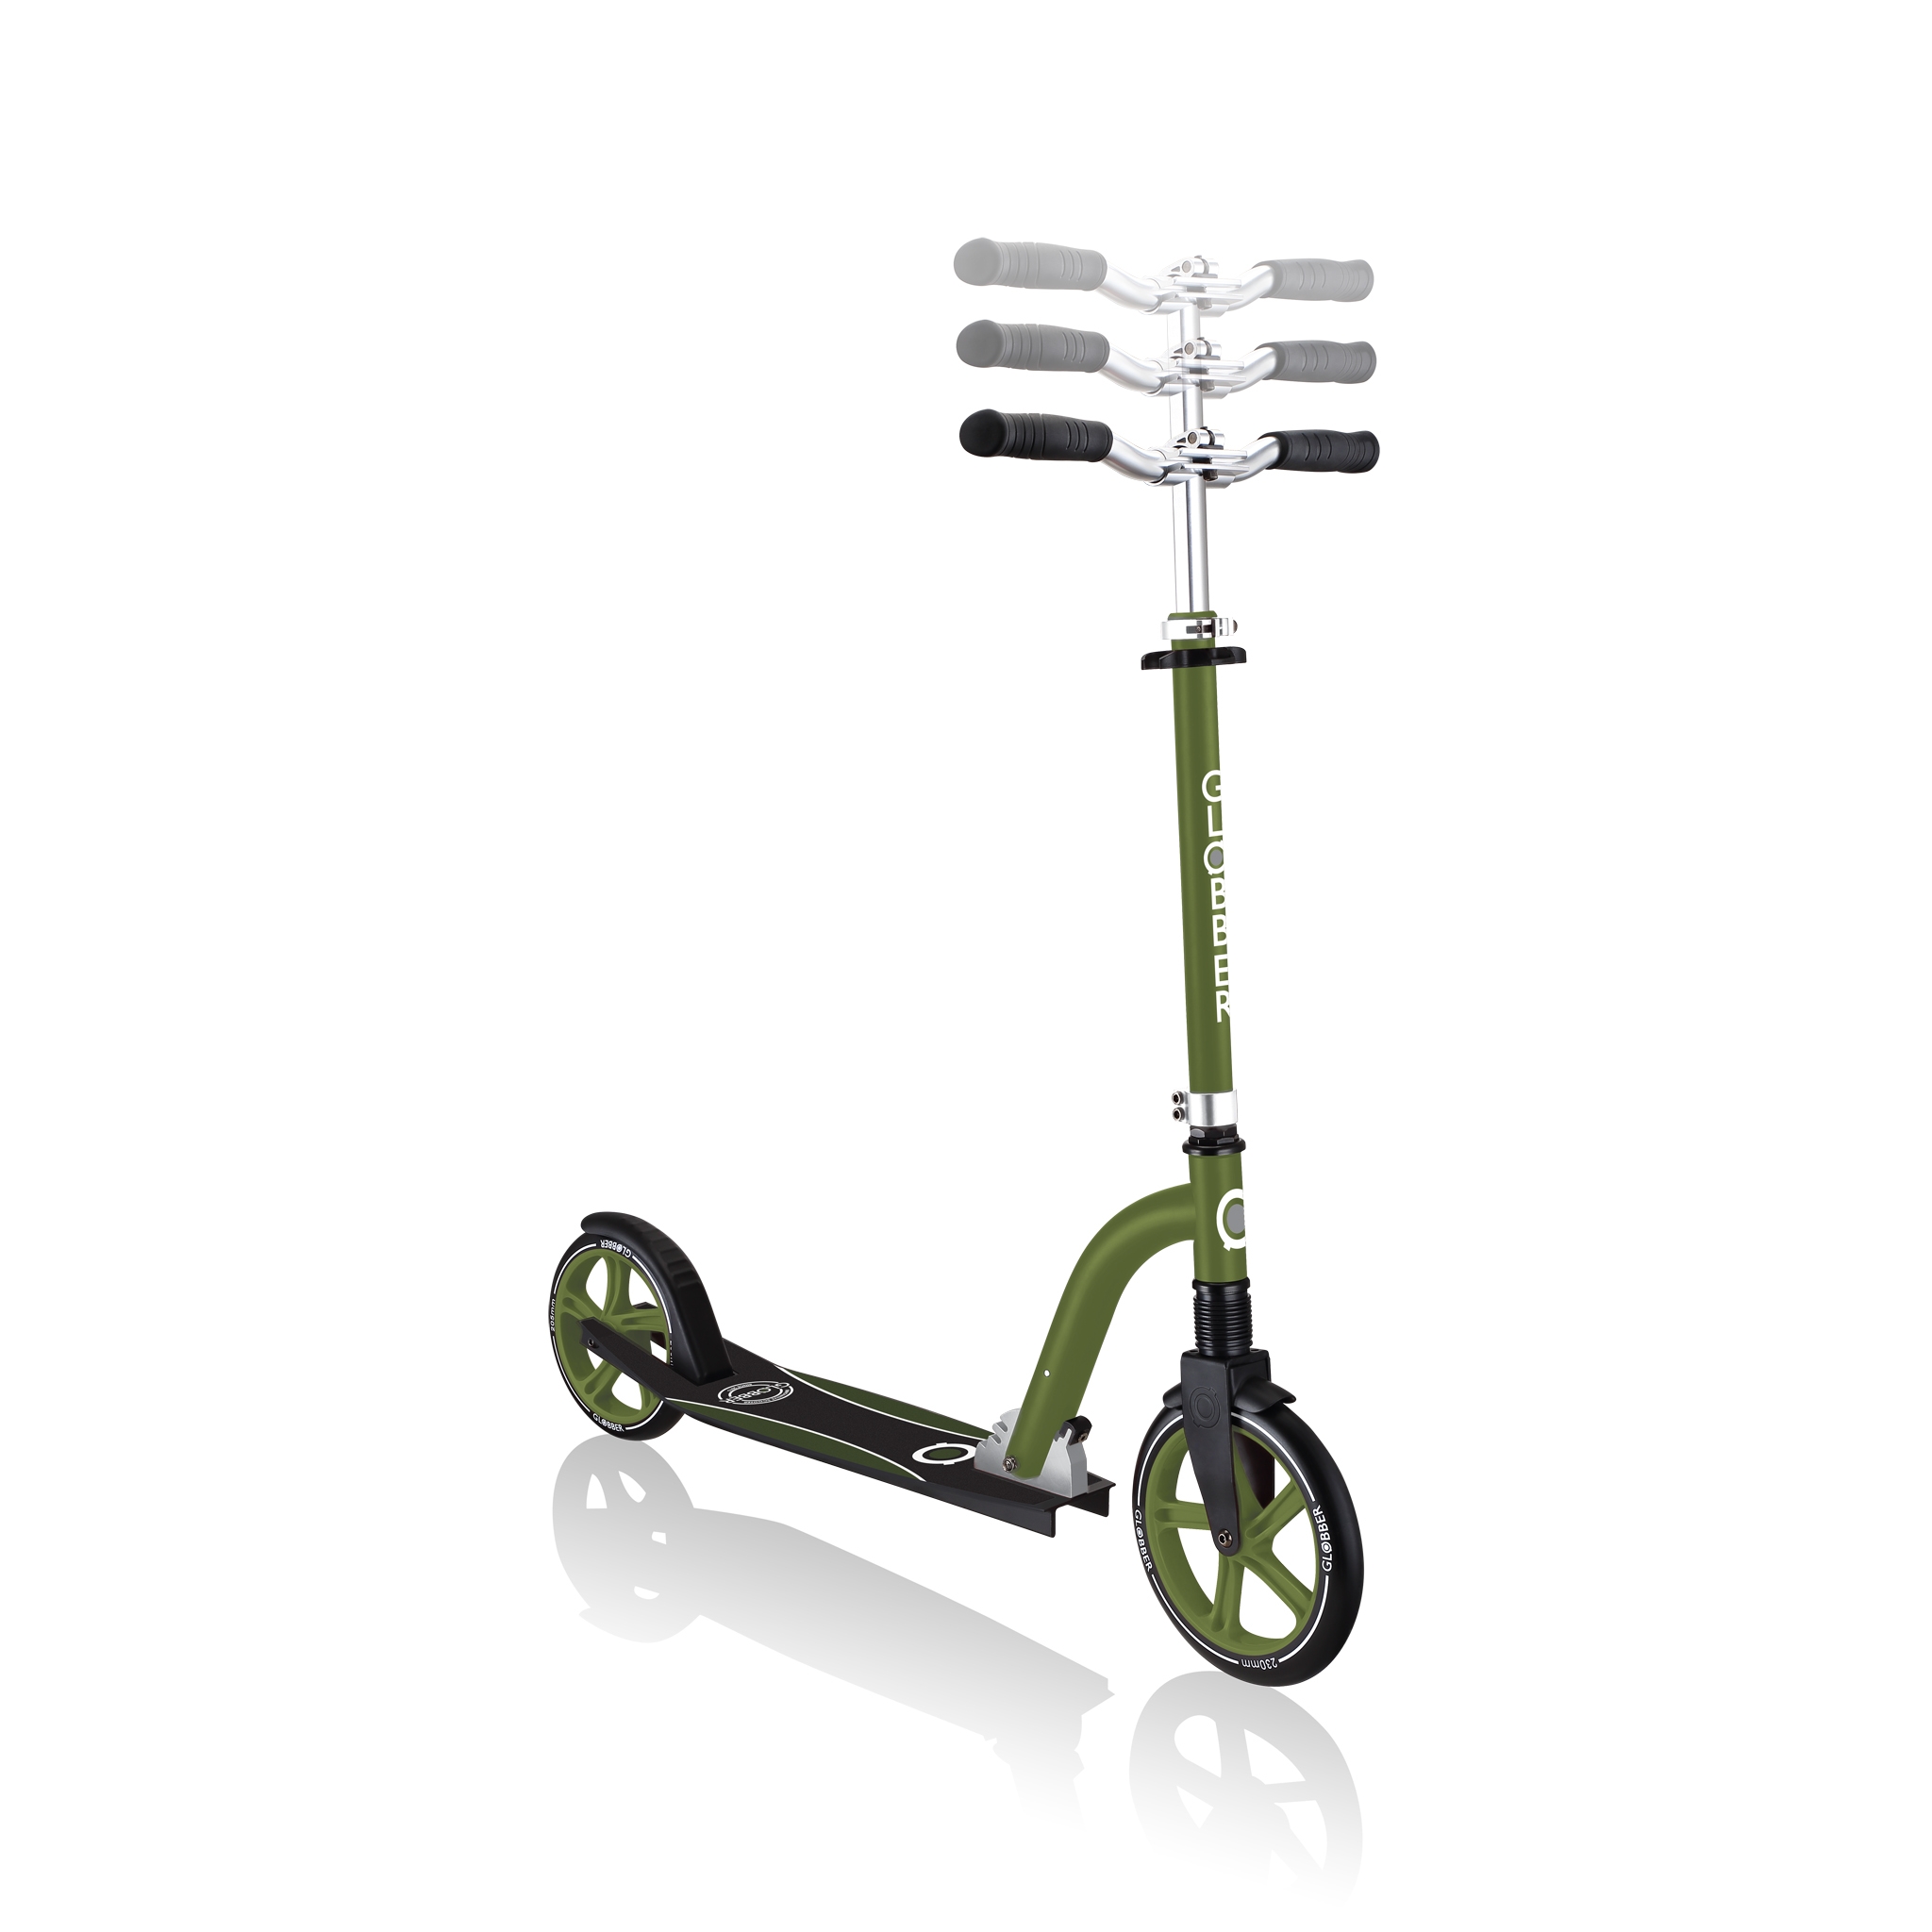 NL-230-205-DUO-adjustable-big-wheel-scooters-for-kids-and-teens 6